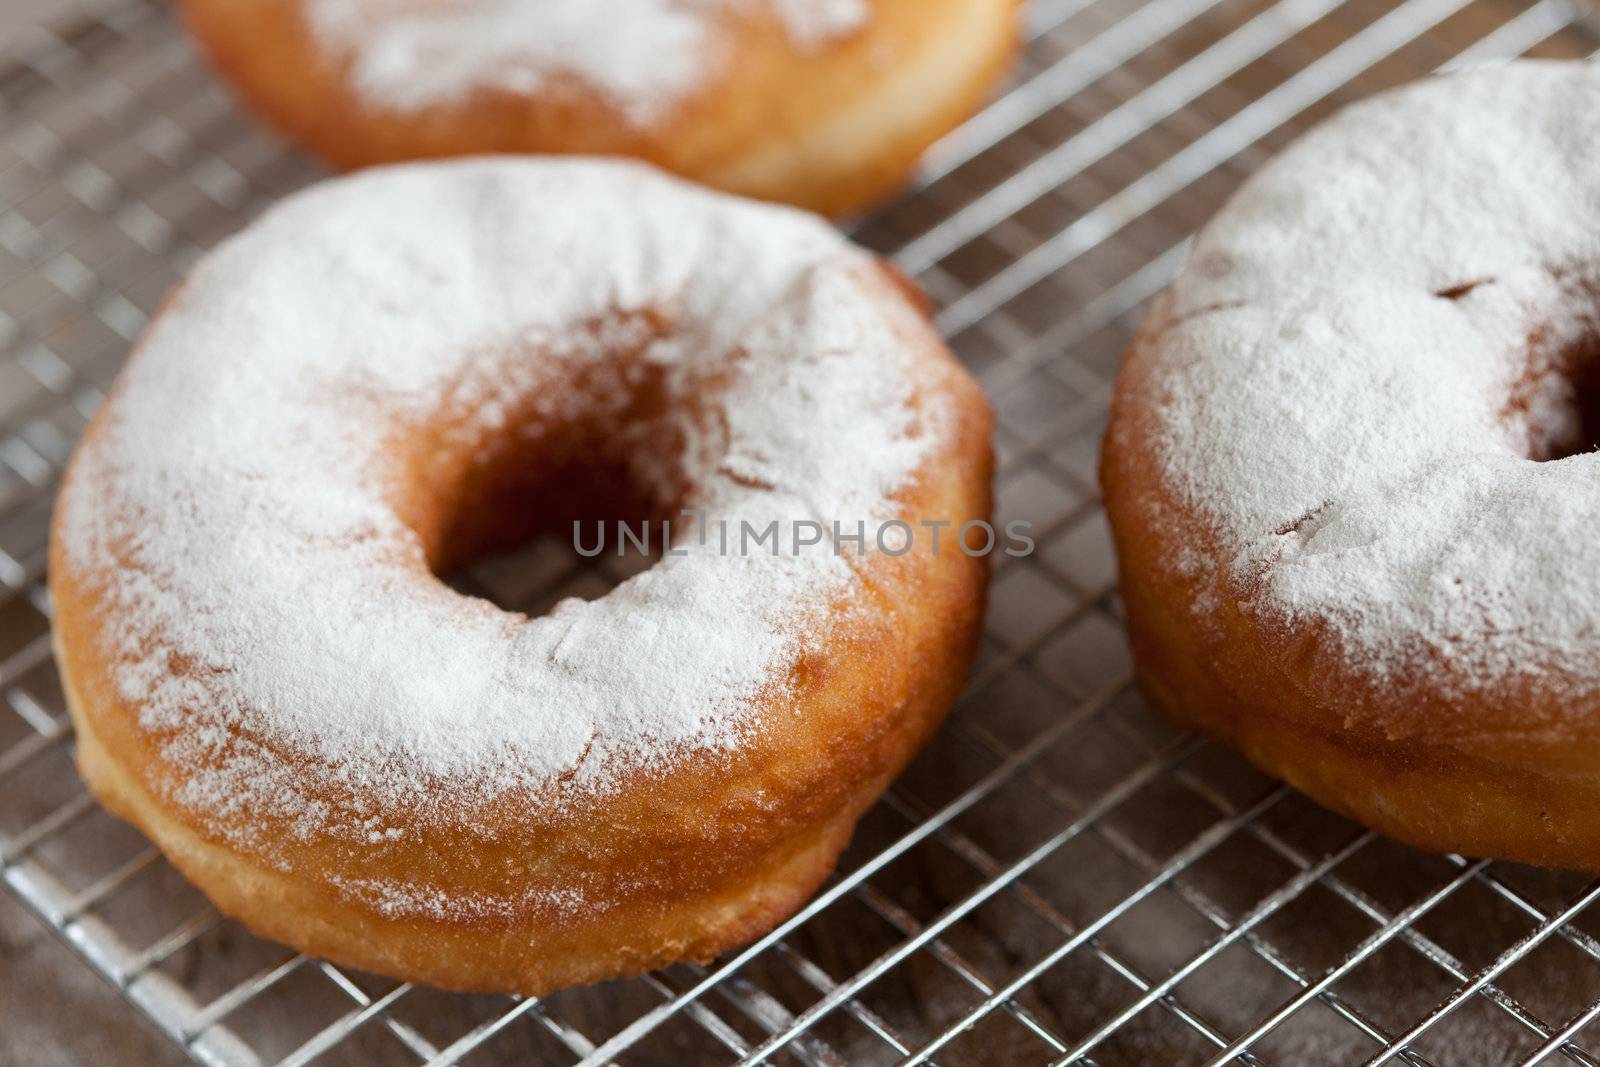 Delicious and homemade doughnuts sprinkled with icing sugar